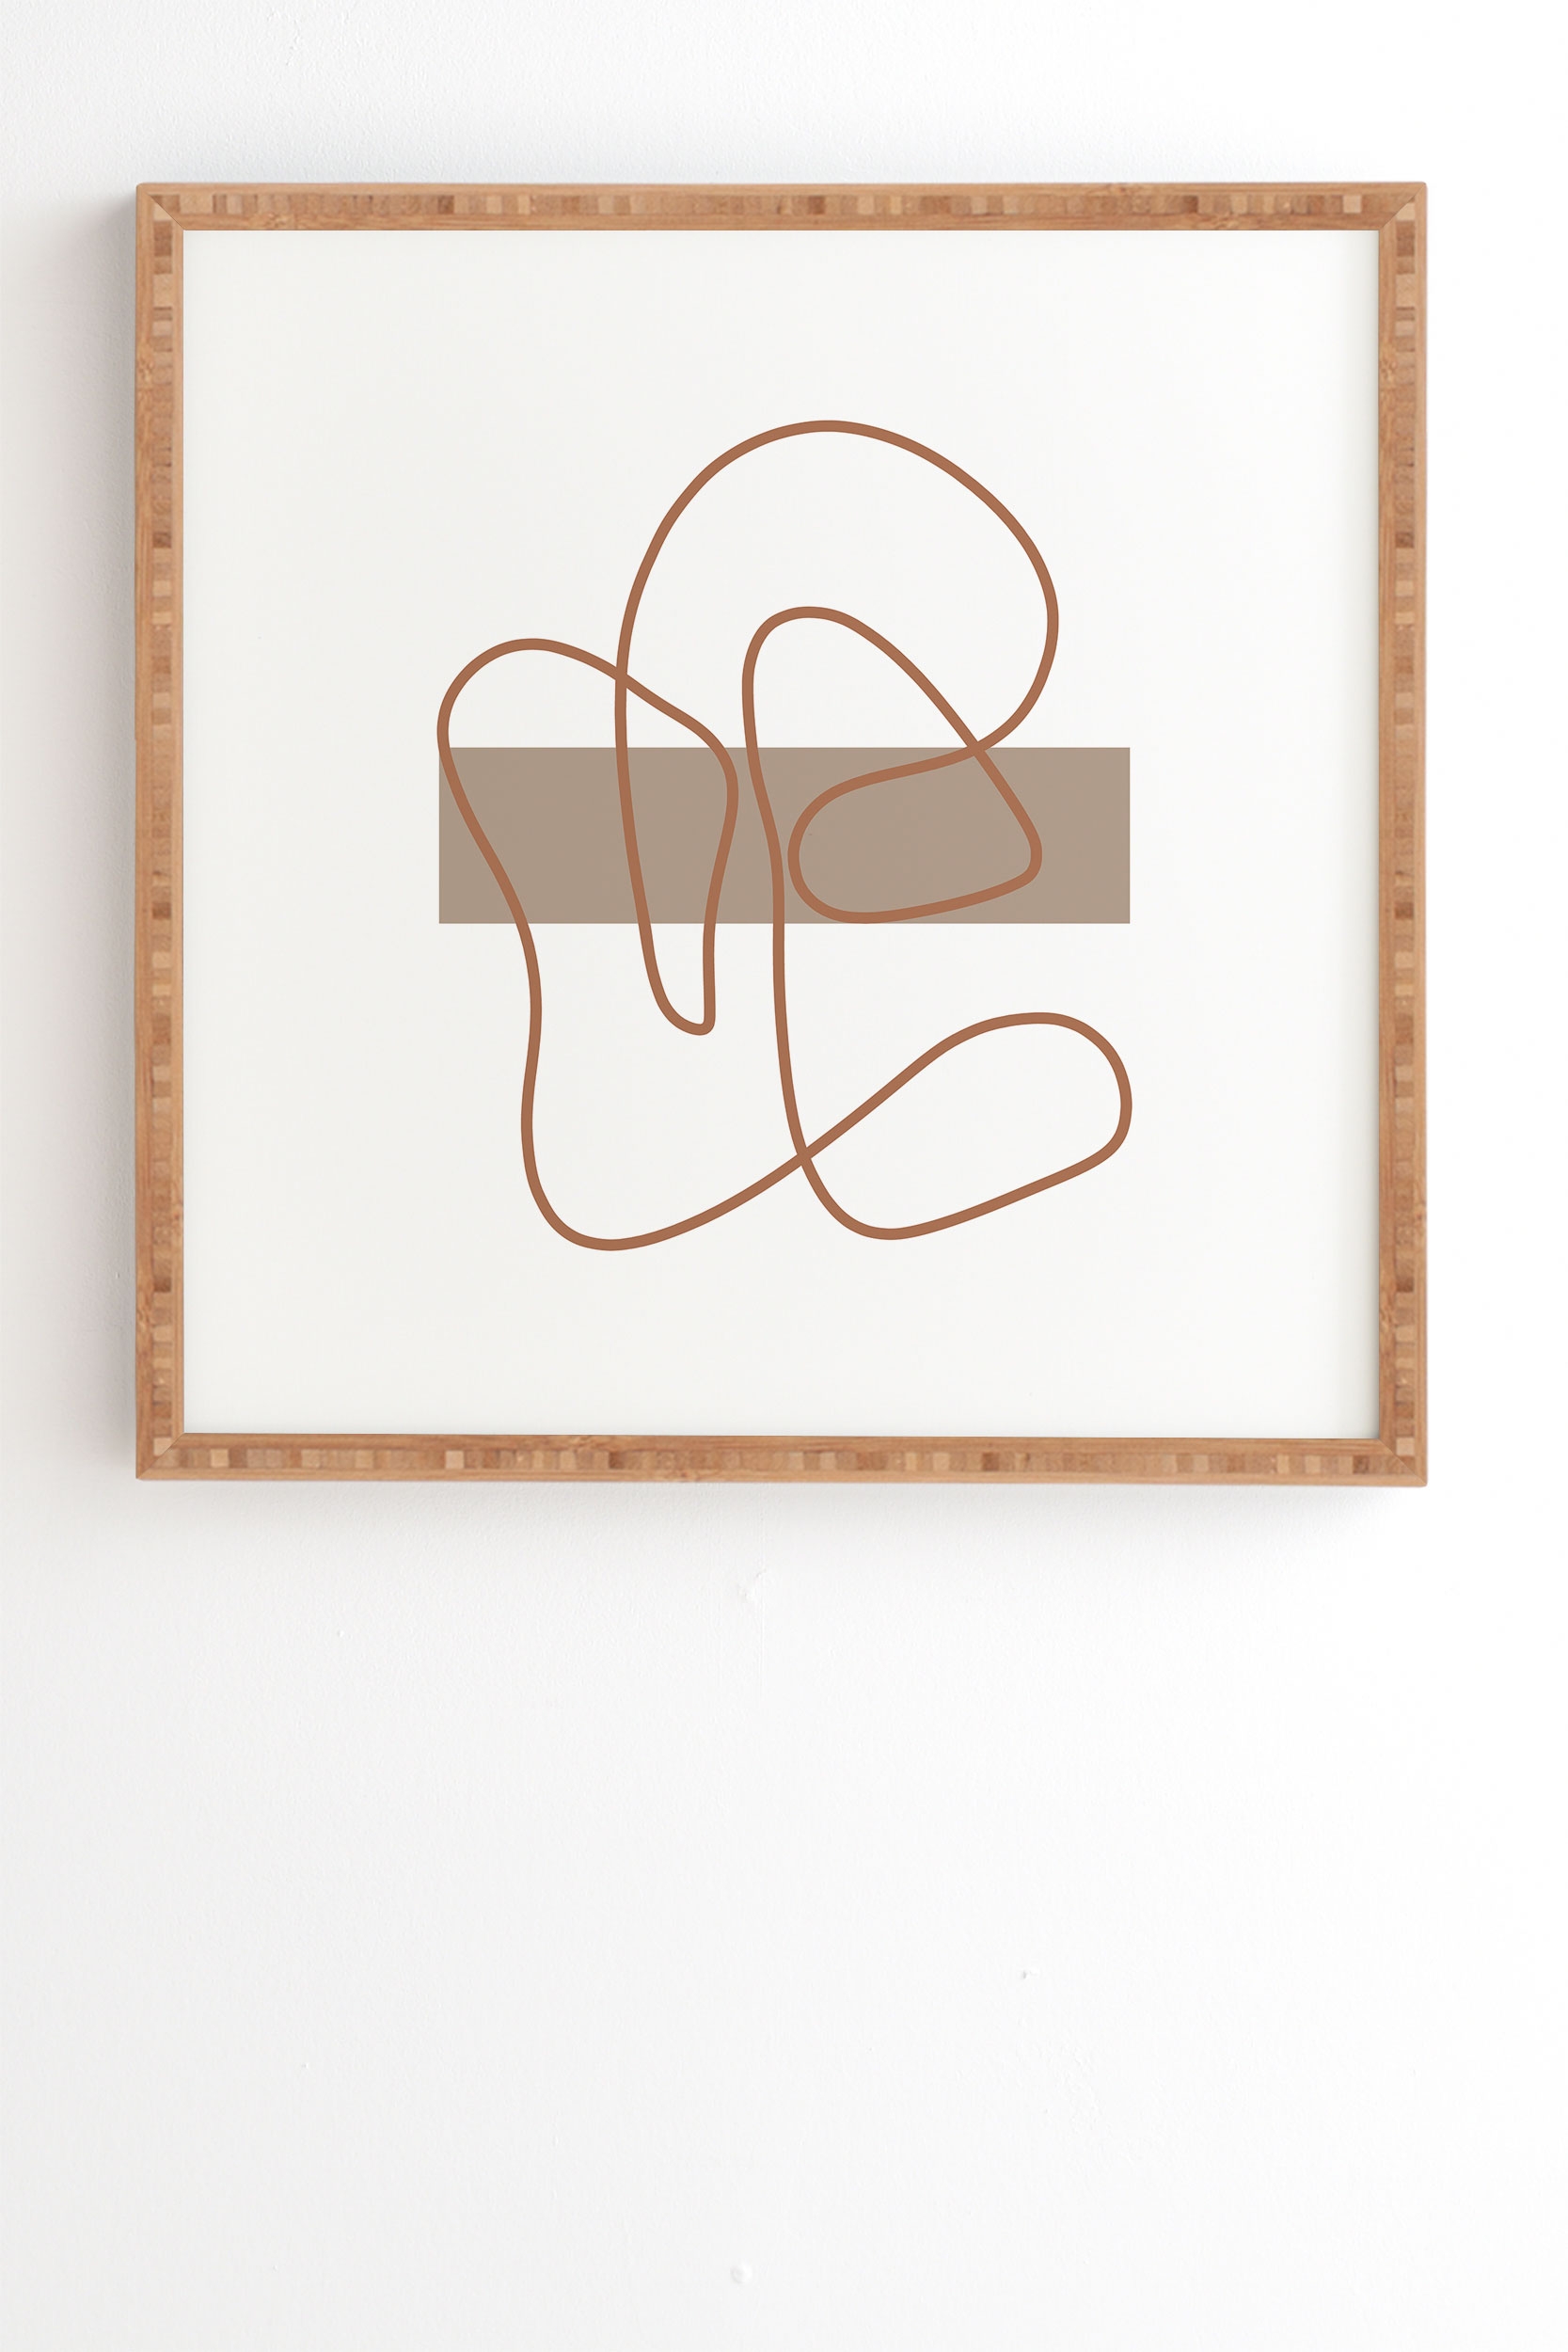 Abstract Line Neutral by Mambo Art Studio - Framed Wall Art Bamboo 11" x 13" - Image 1